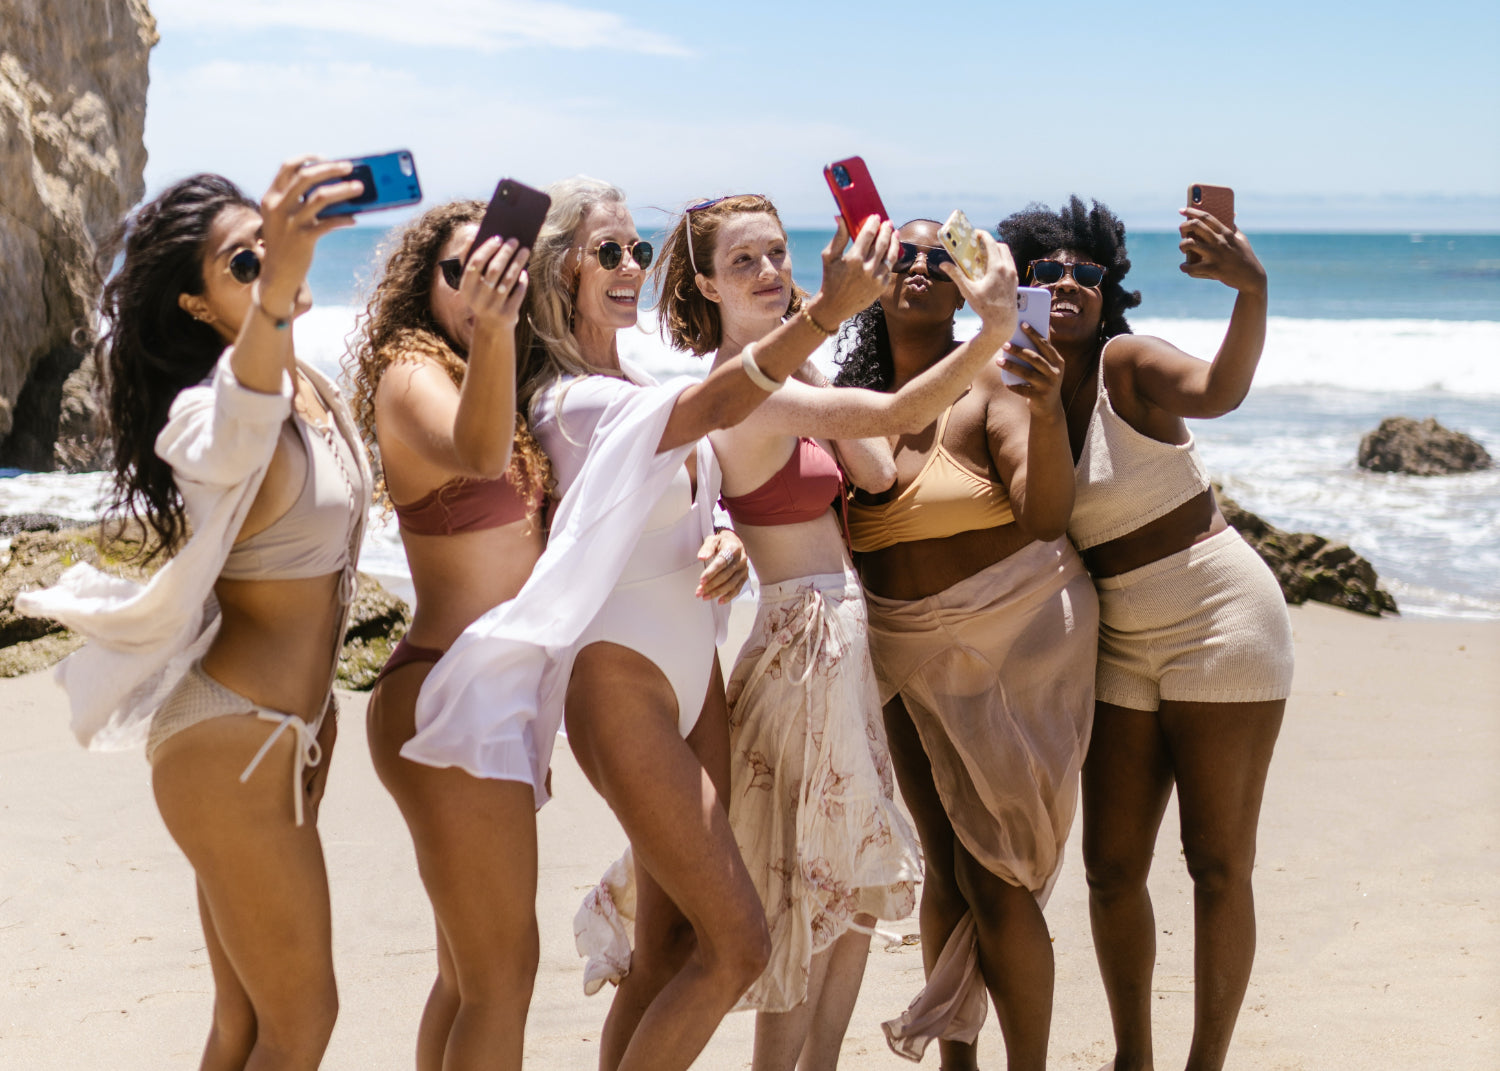 A row of women take selfies at the beach